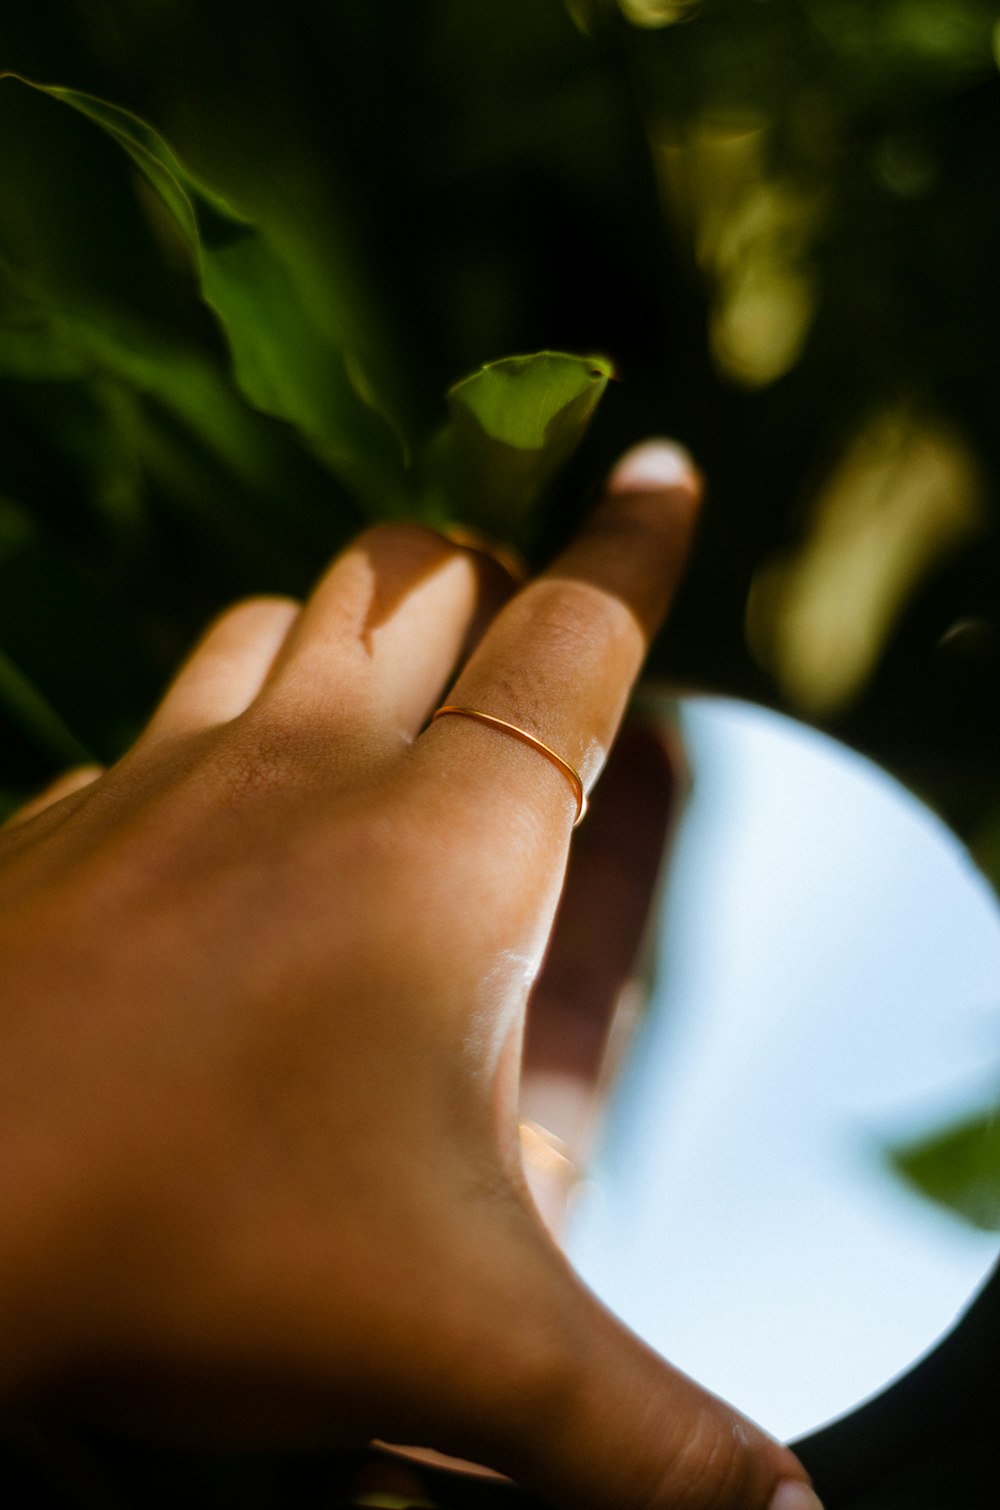 a hand holding a small plant